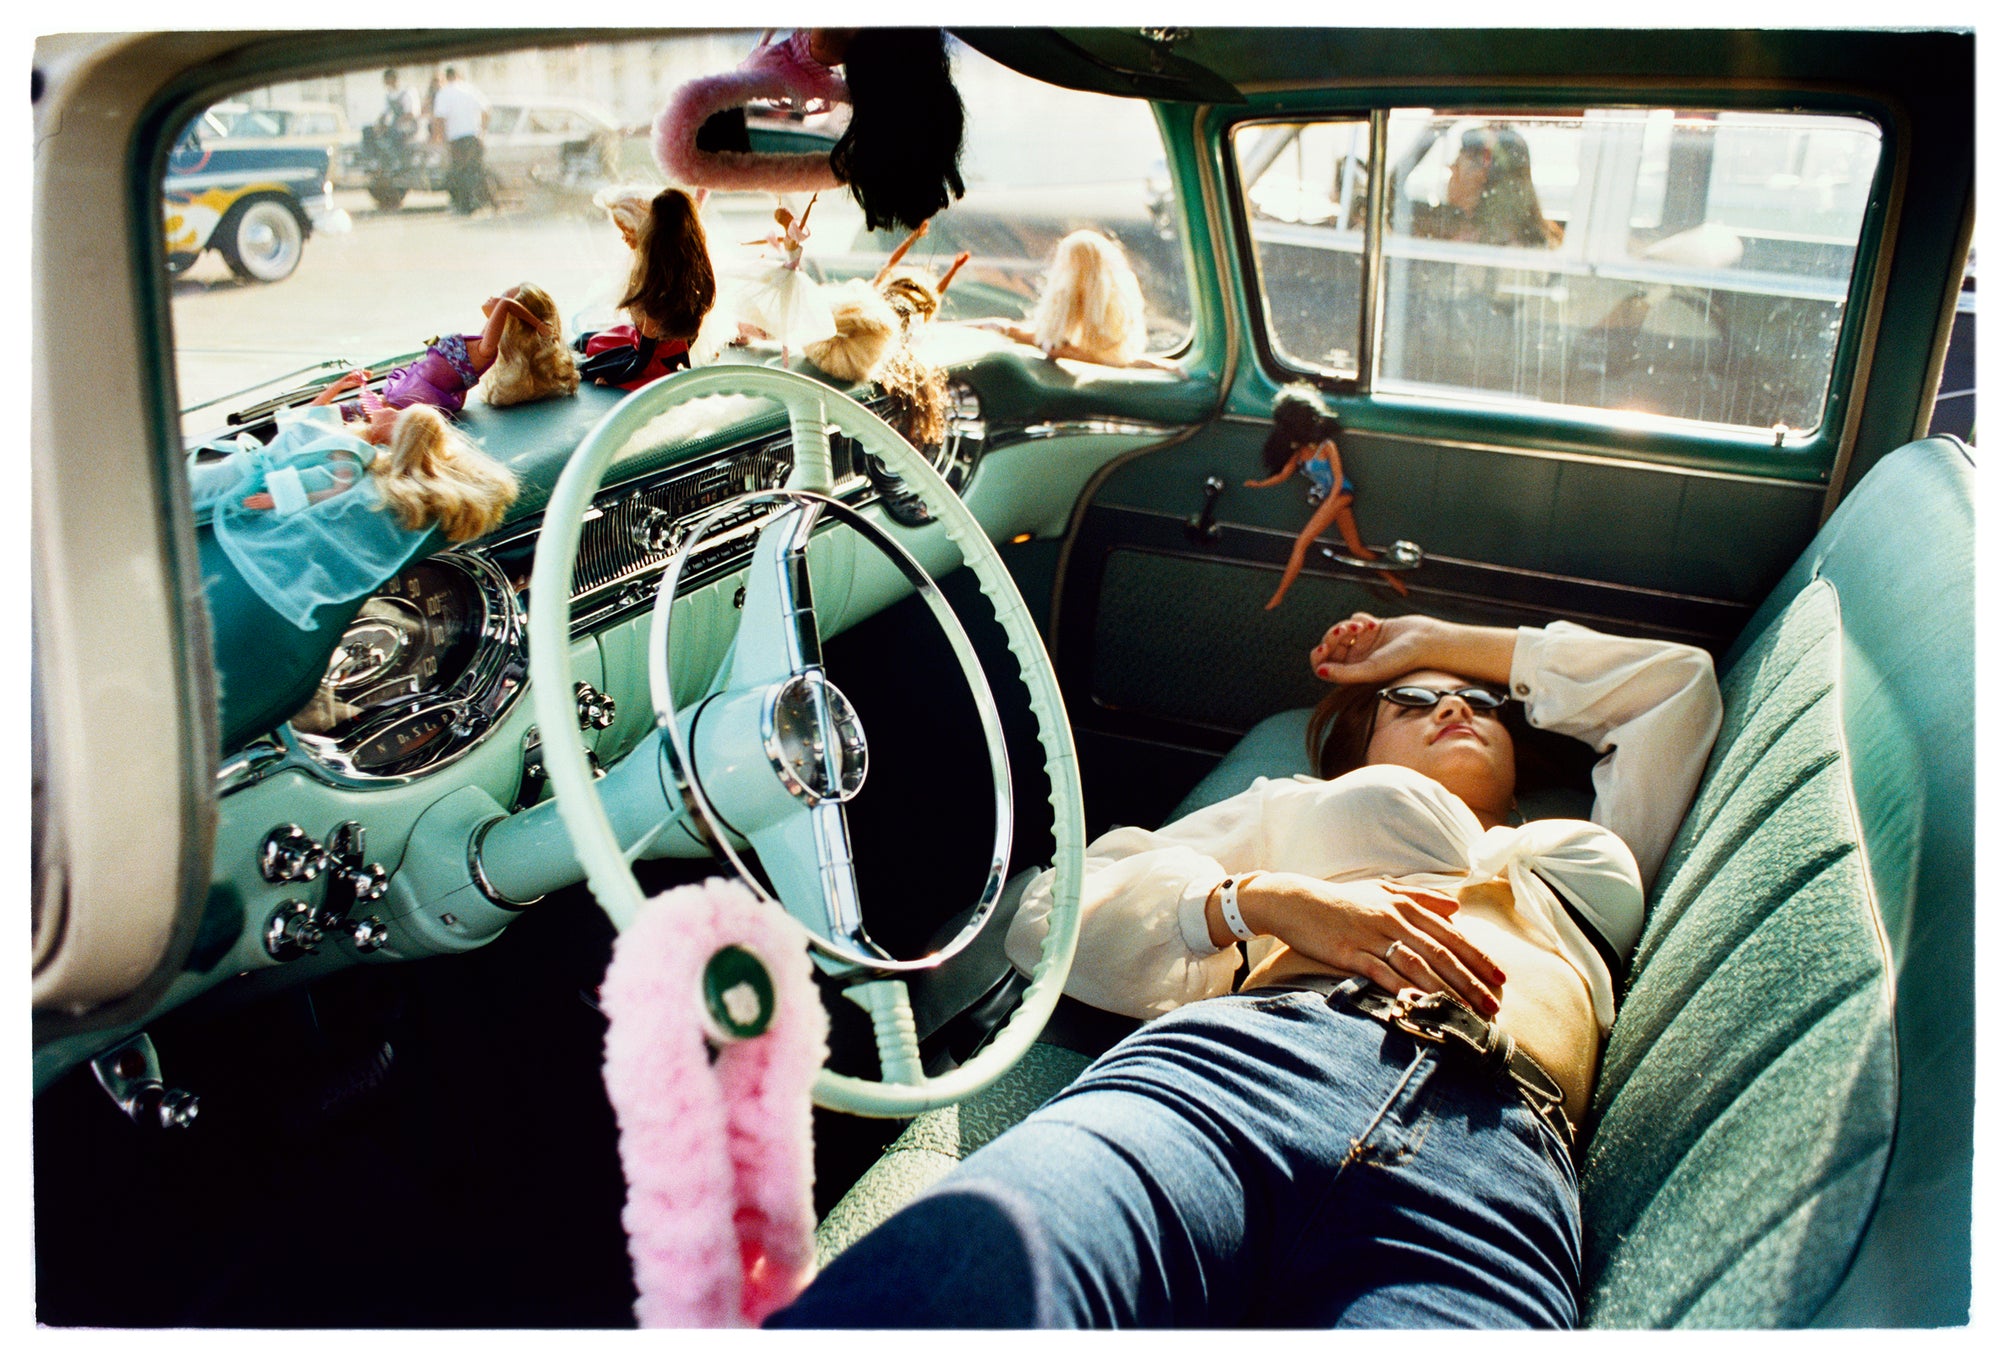 Photograph by Richard Heeps.  Inside a classic American car with a green interior, and dolls adorning the dashboard.  Lying on the seats is a woman resting.